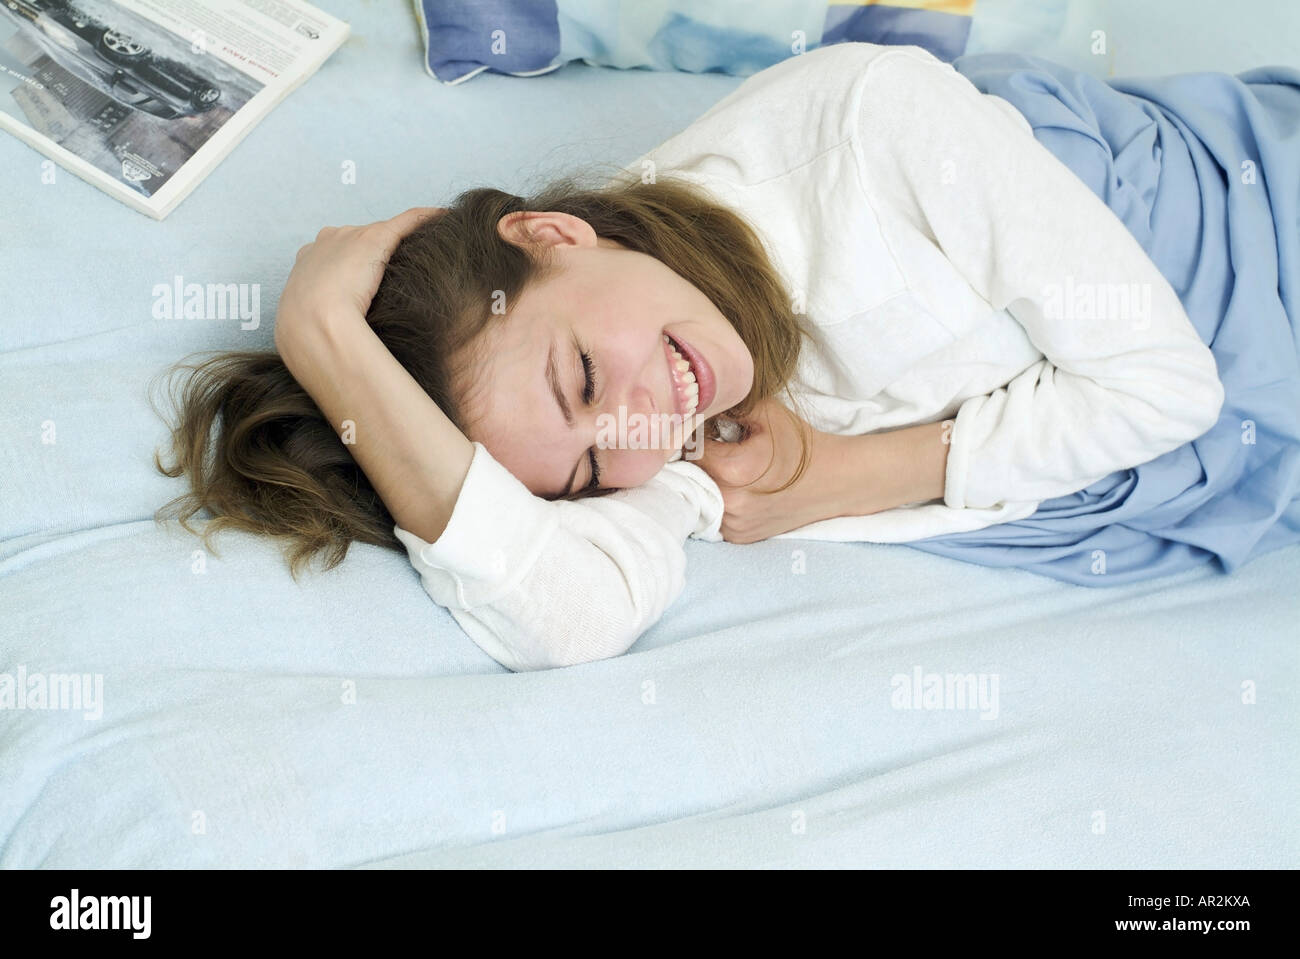 Young woman lying on bed and laughing Stock Photo